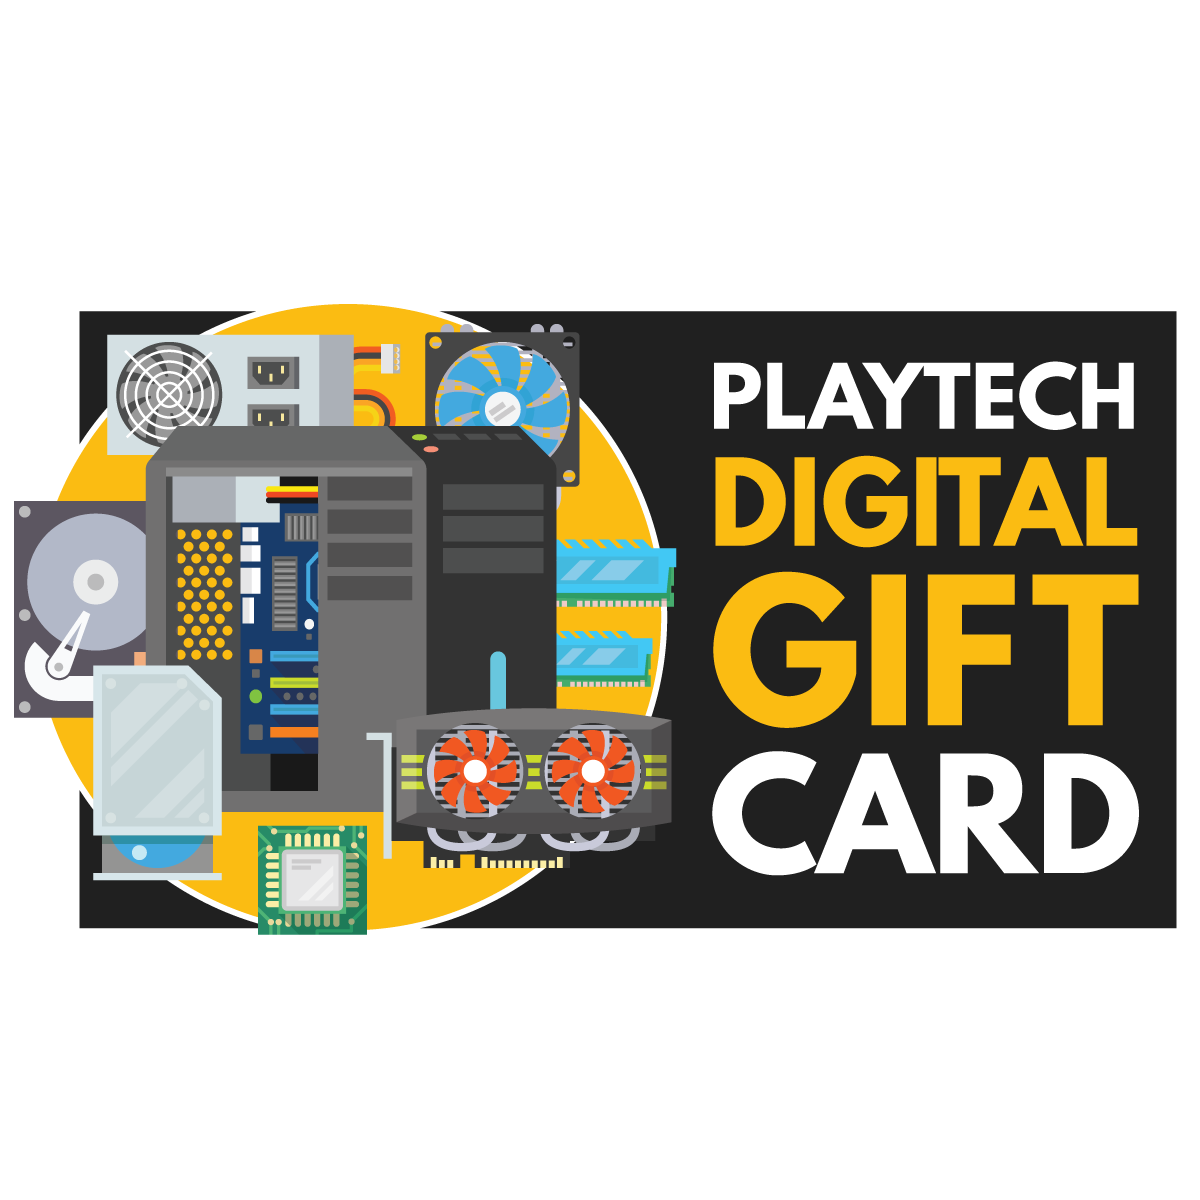 Playtech Gift Cards $100 - Digital Delivery Only - Playtech